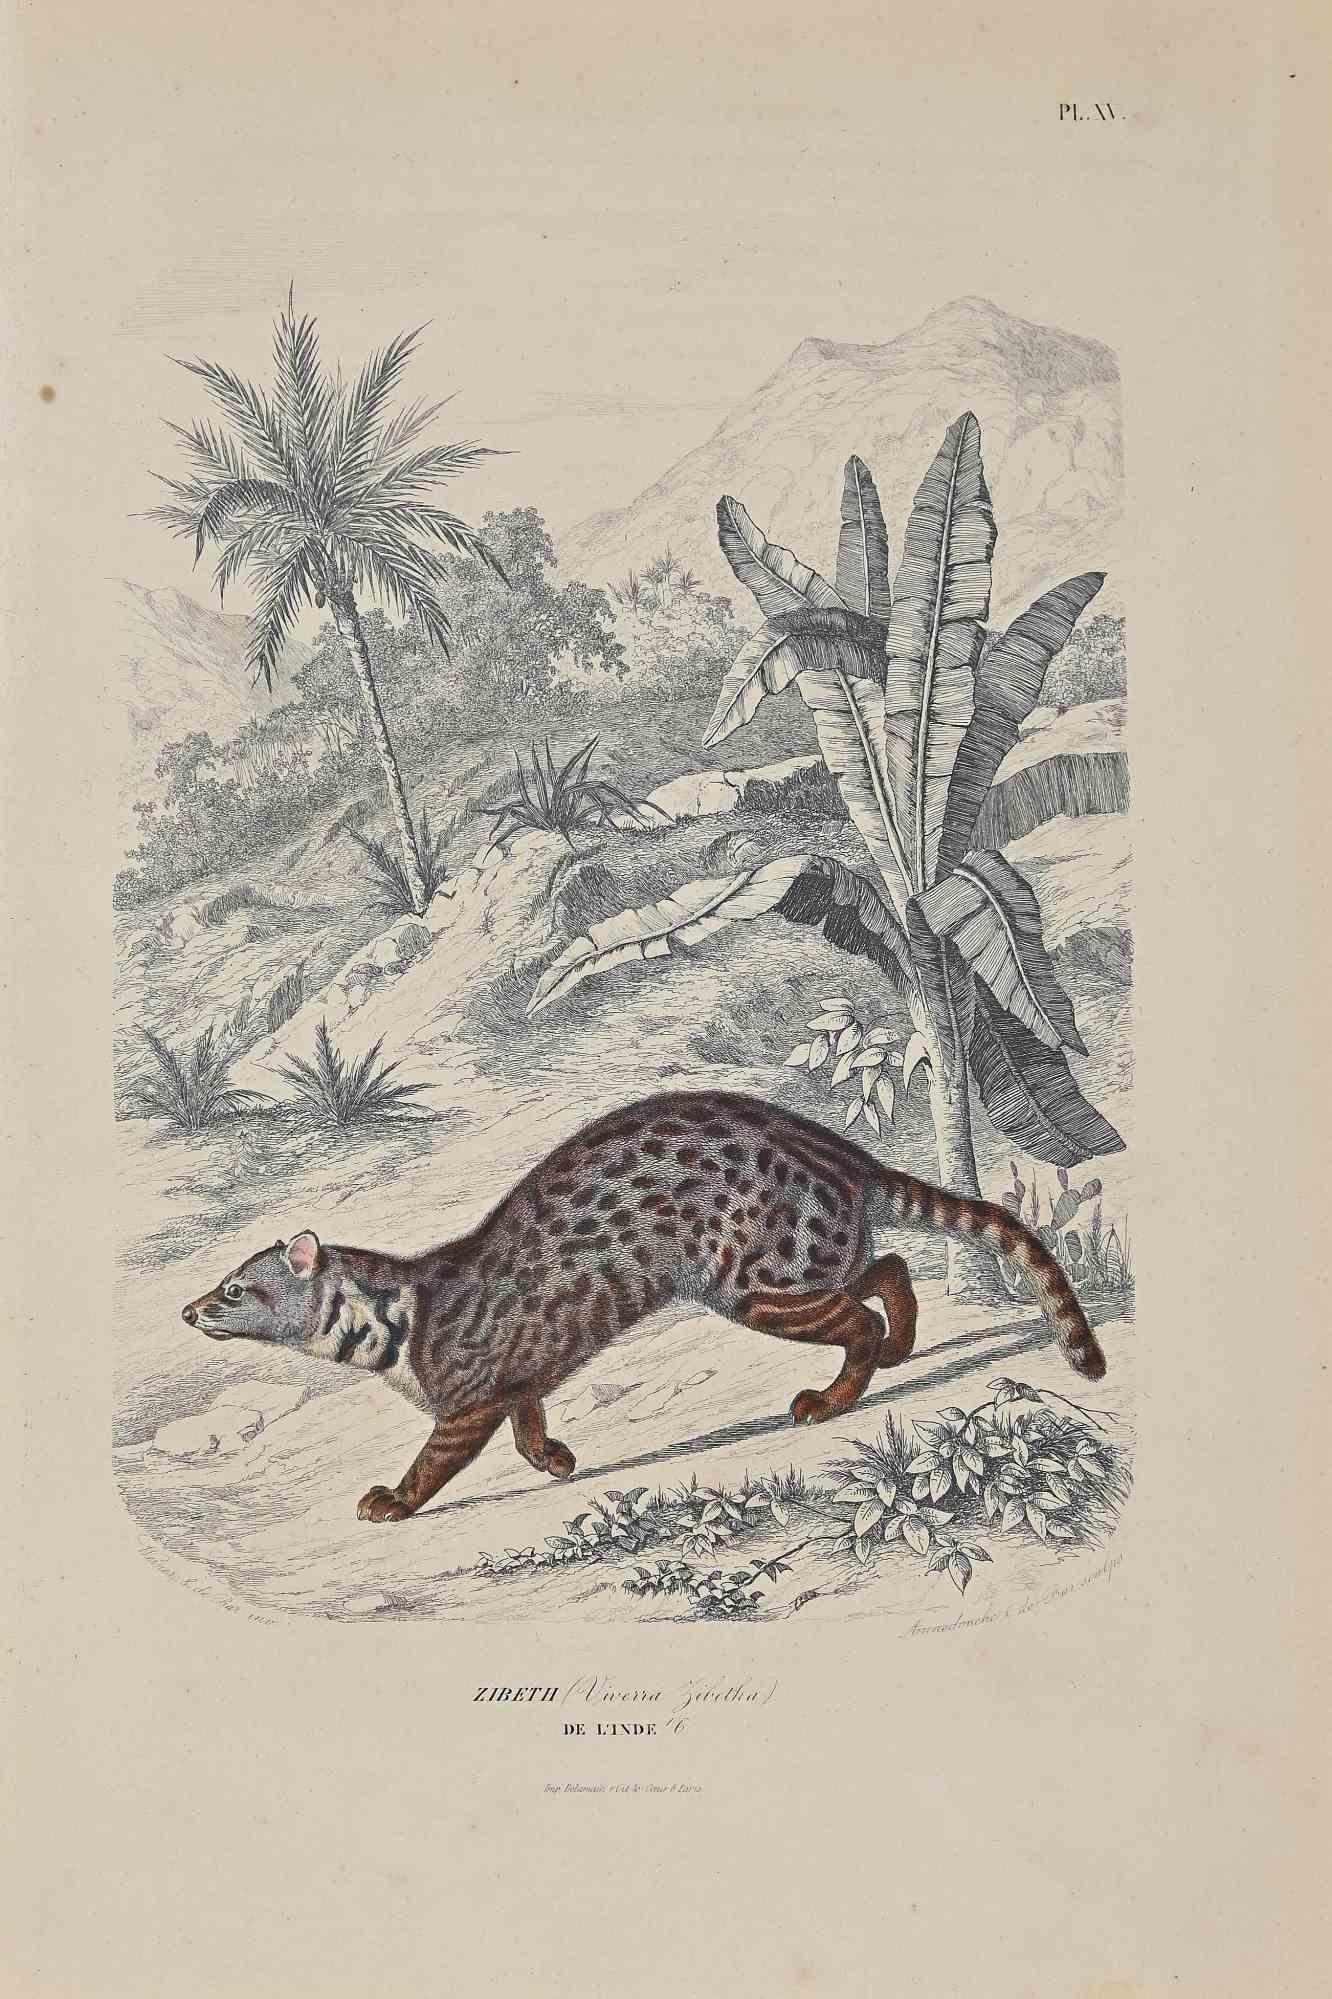 Zibeth is an original lithograph on ivory-colored paper, realized by Paul Gervais (1816-1879). The artwork is from The Series of "Les Trois Règnes de la Nature", and was published in 1854.

Good conditions except for some foxings.

Titled on the